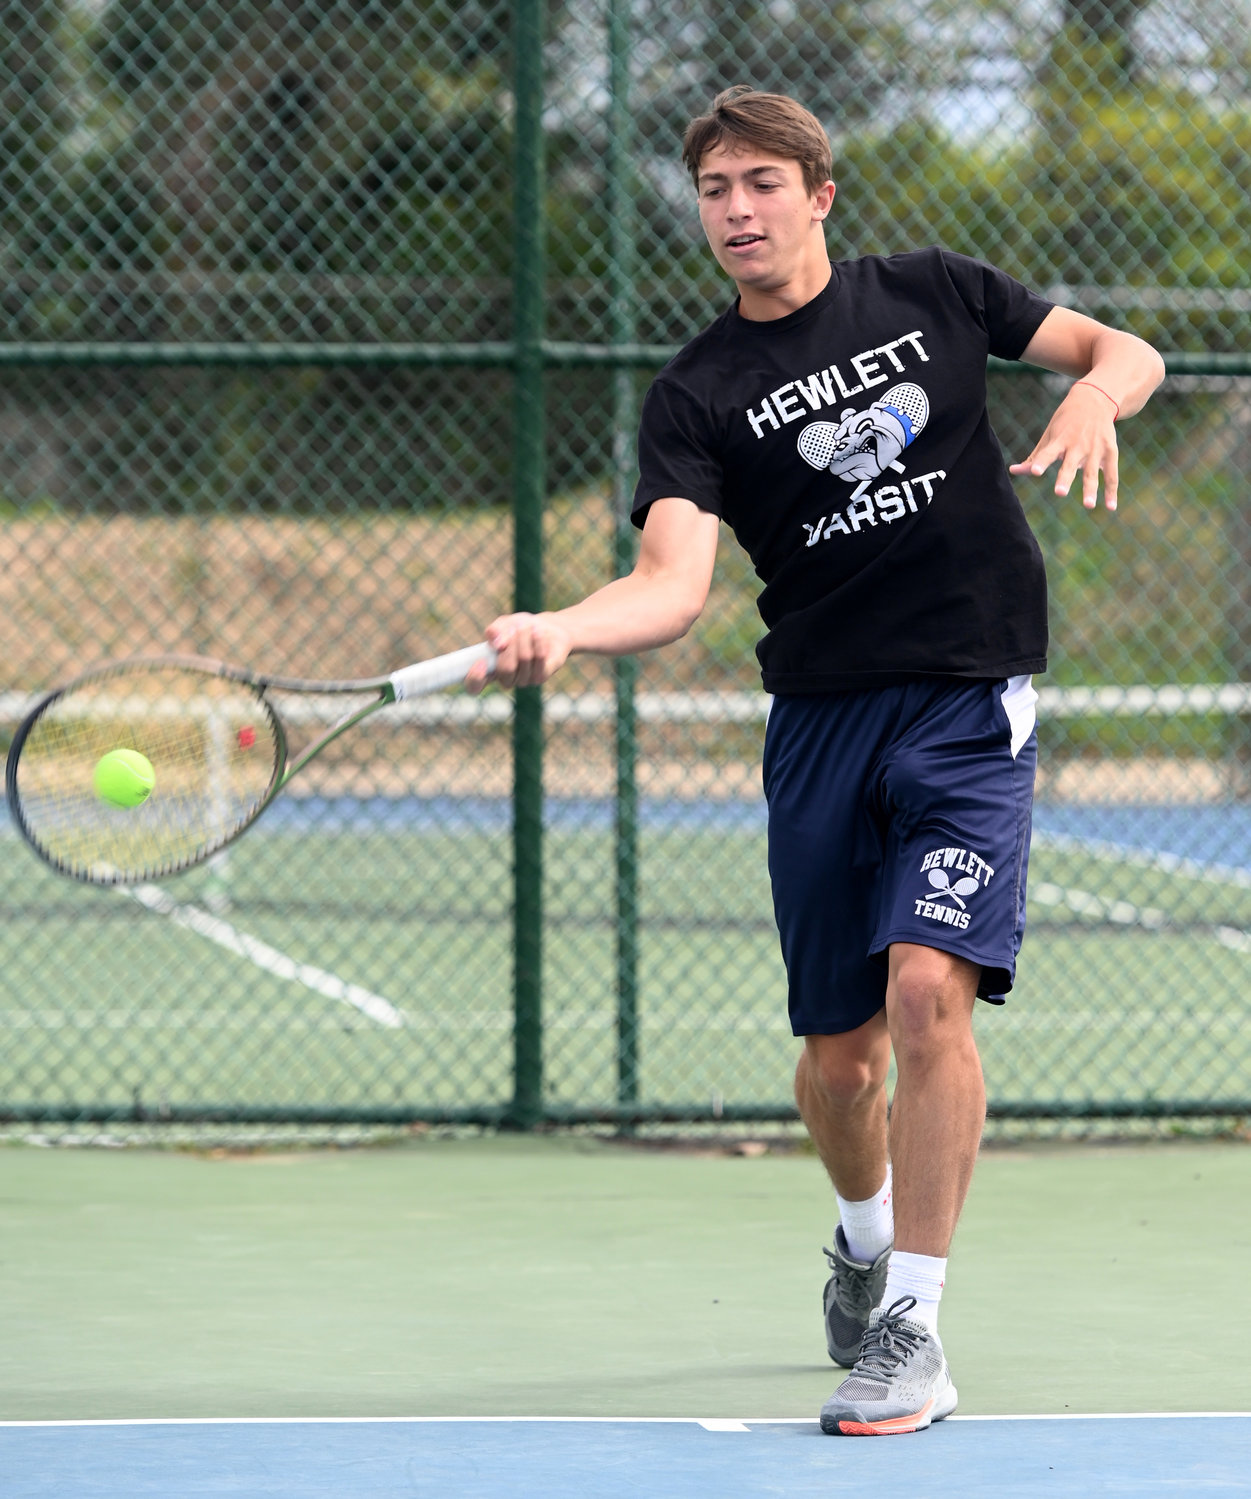 Hewlett junior Stephan Gershfeld defeated Great Neck South's Albert Hu, 6-0, 6-3, on Sunday afternoon to repeat as Nassau County boys' tennis singles champion.